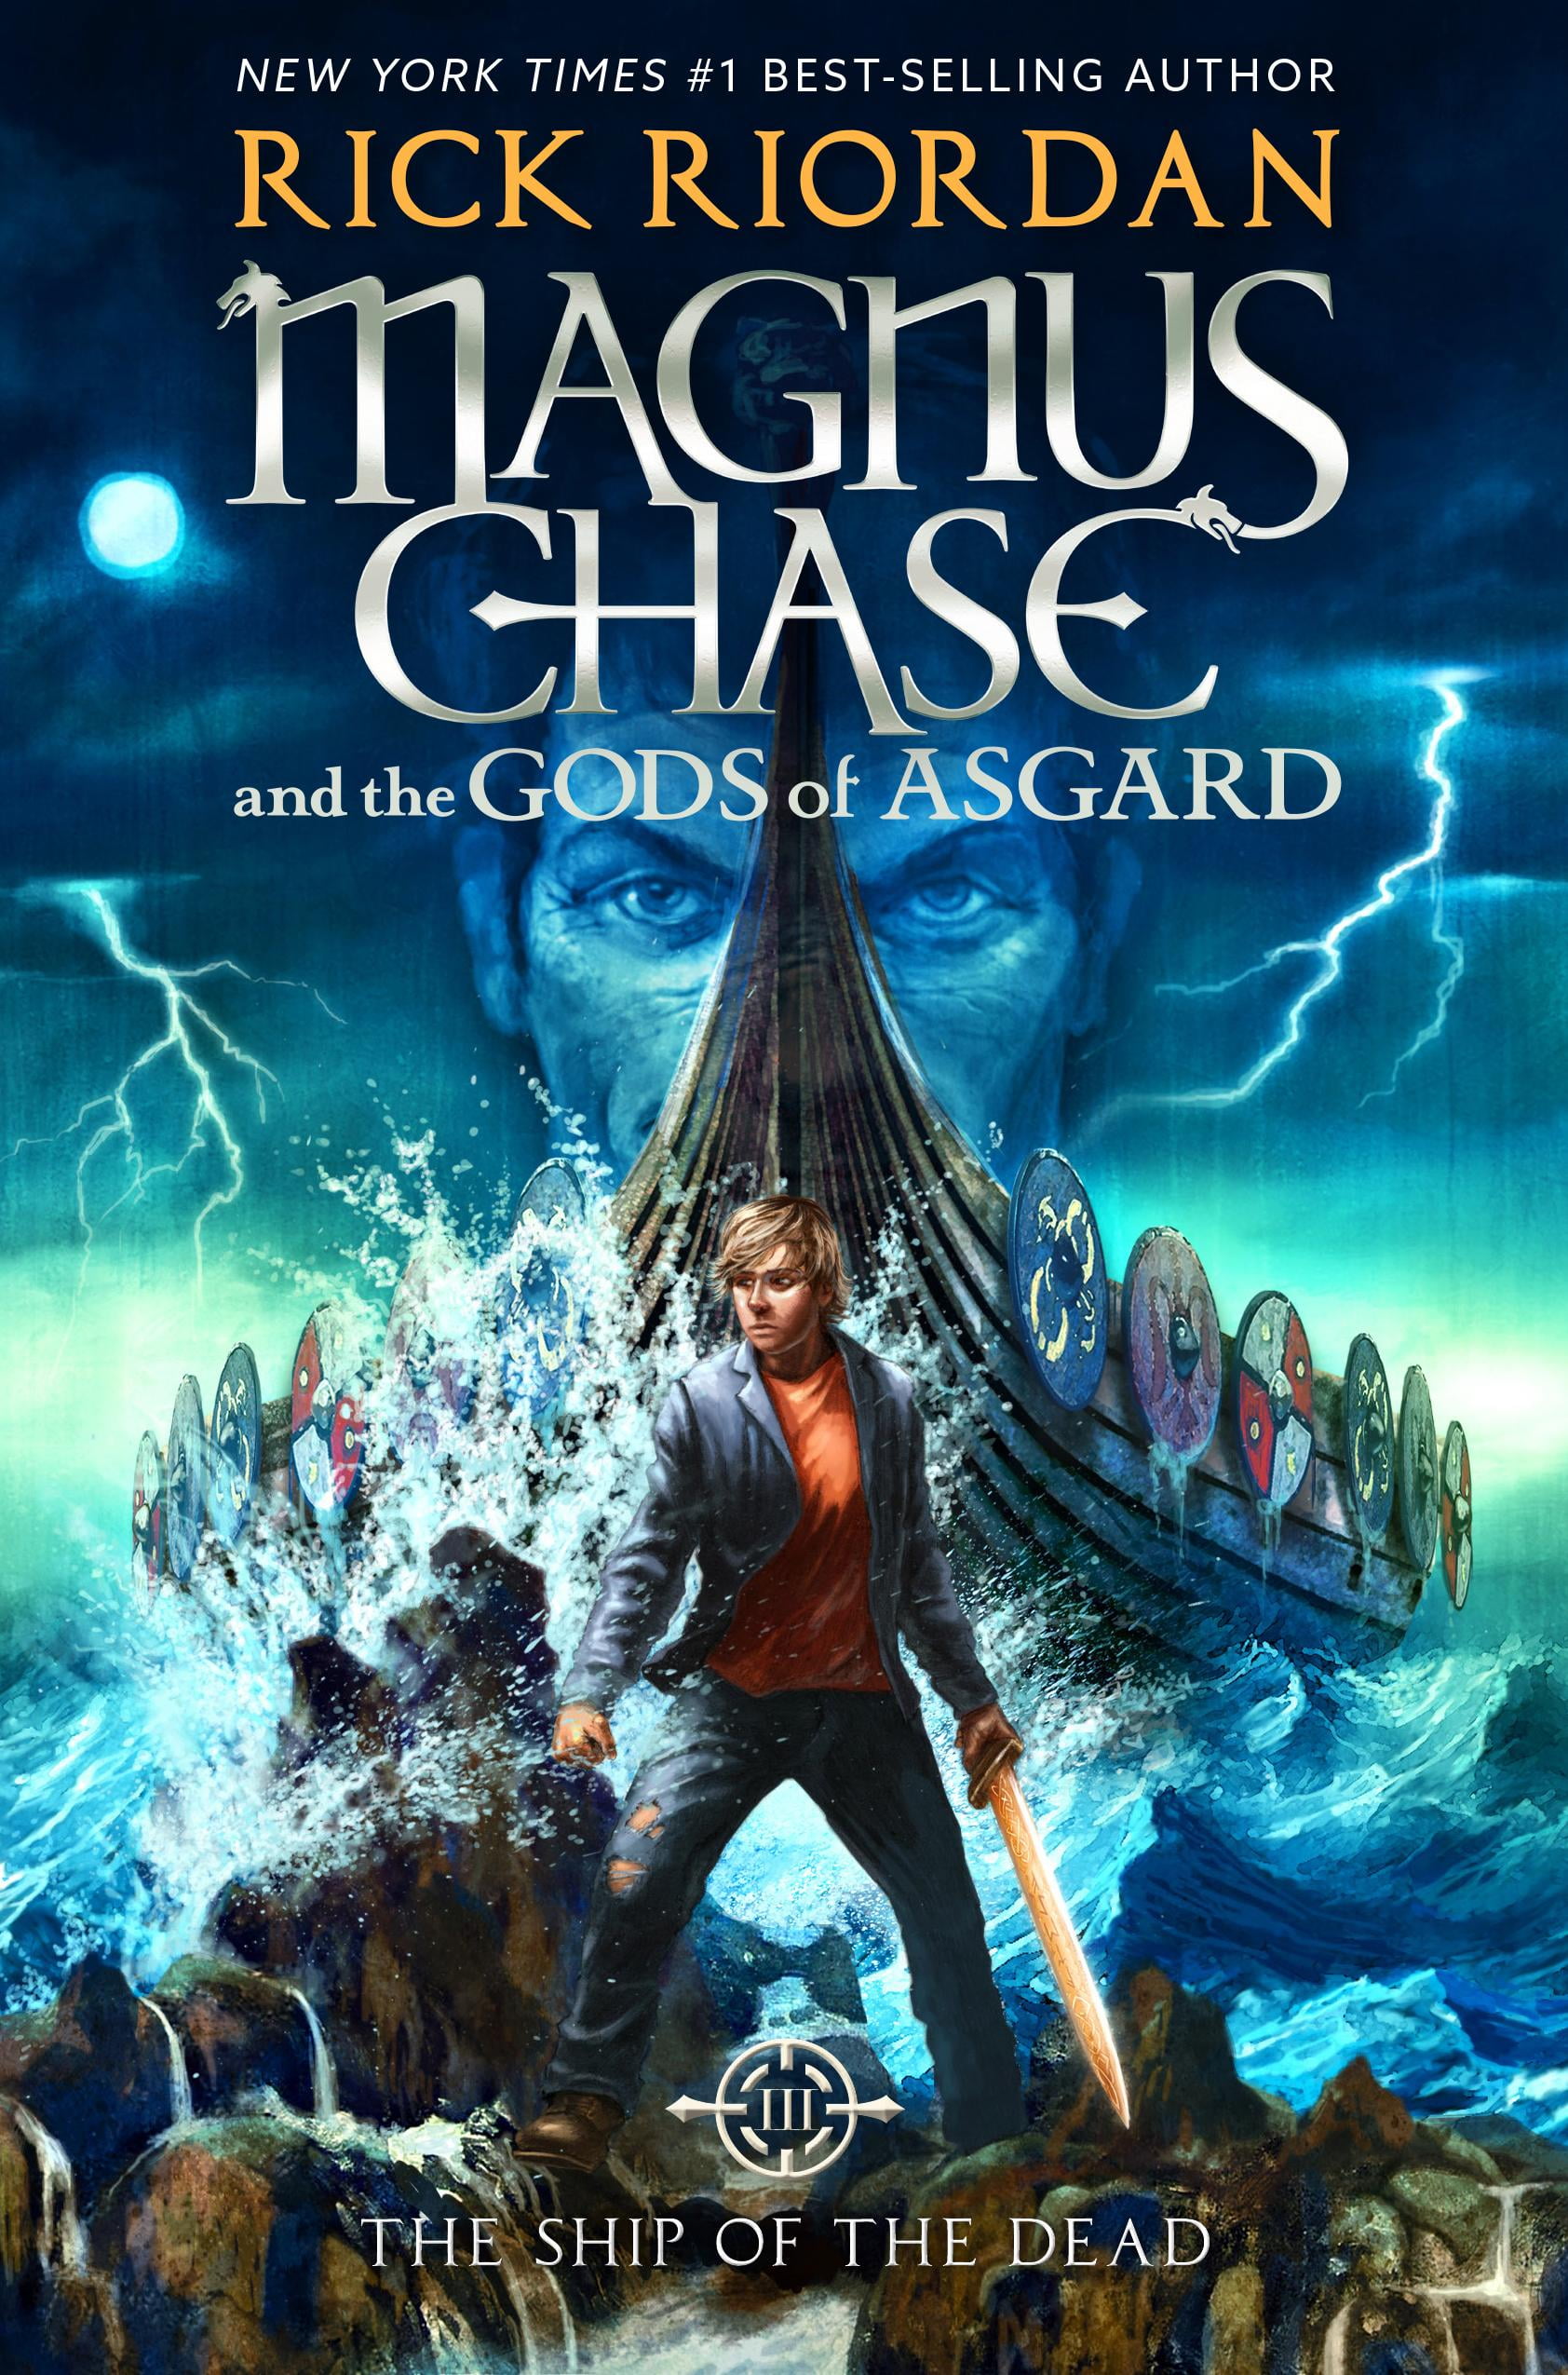 Magnus Chase and the Gods of Asgard An Official Rick Riordan Companion Book For Magnus Chase: Hotel Valhalla Guide to the Norse Worlds : Your Introduction to Deities Mythical Beings & ...